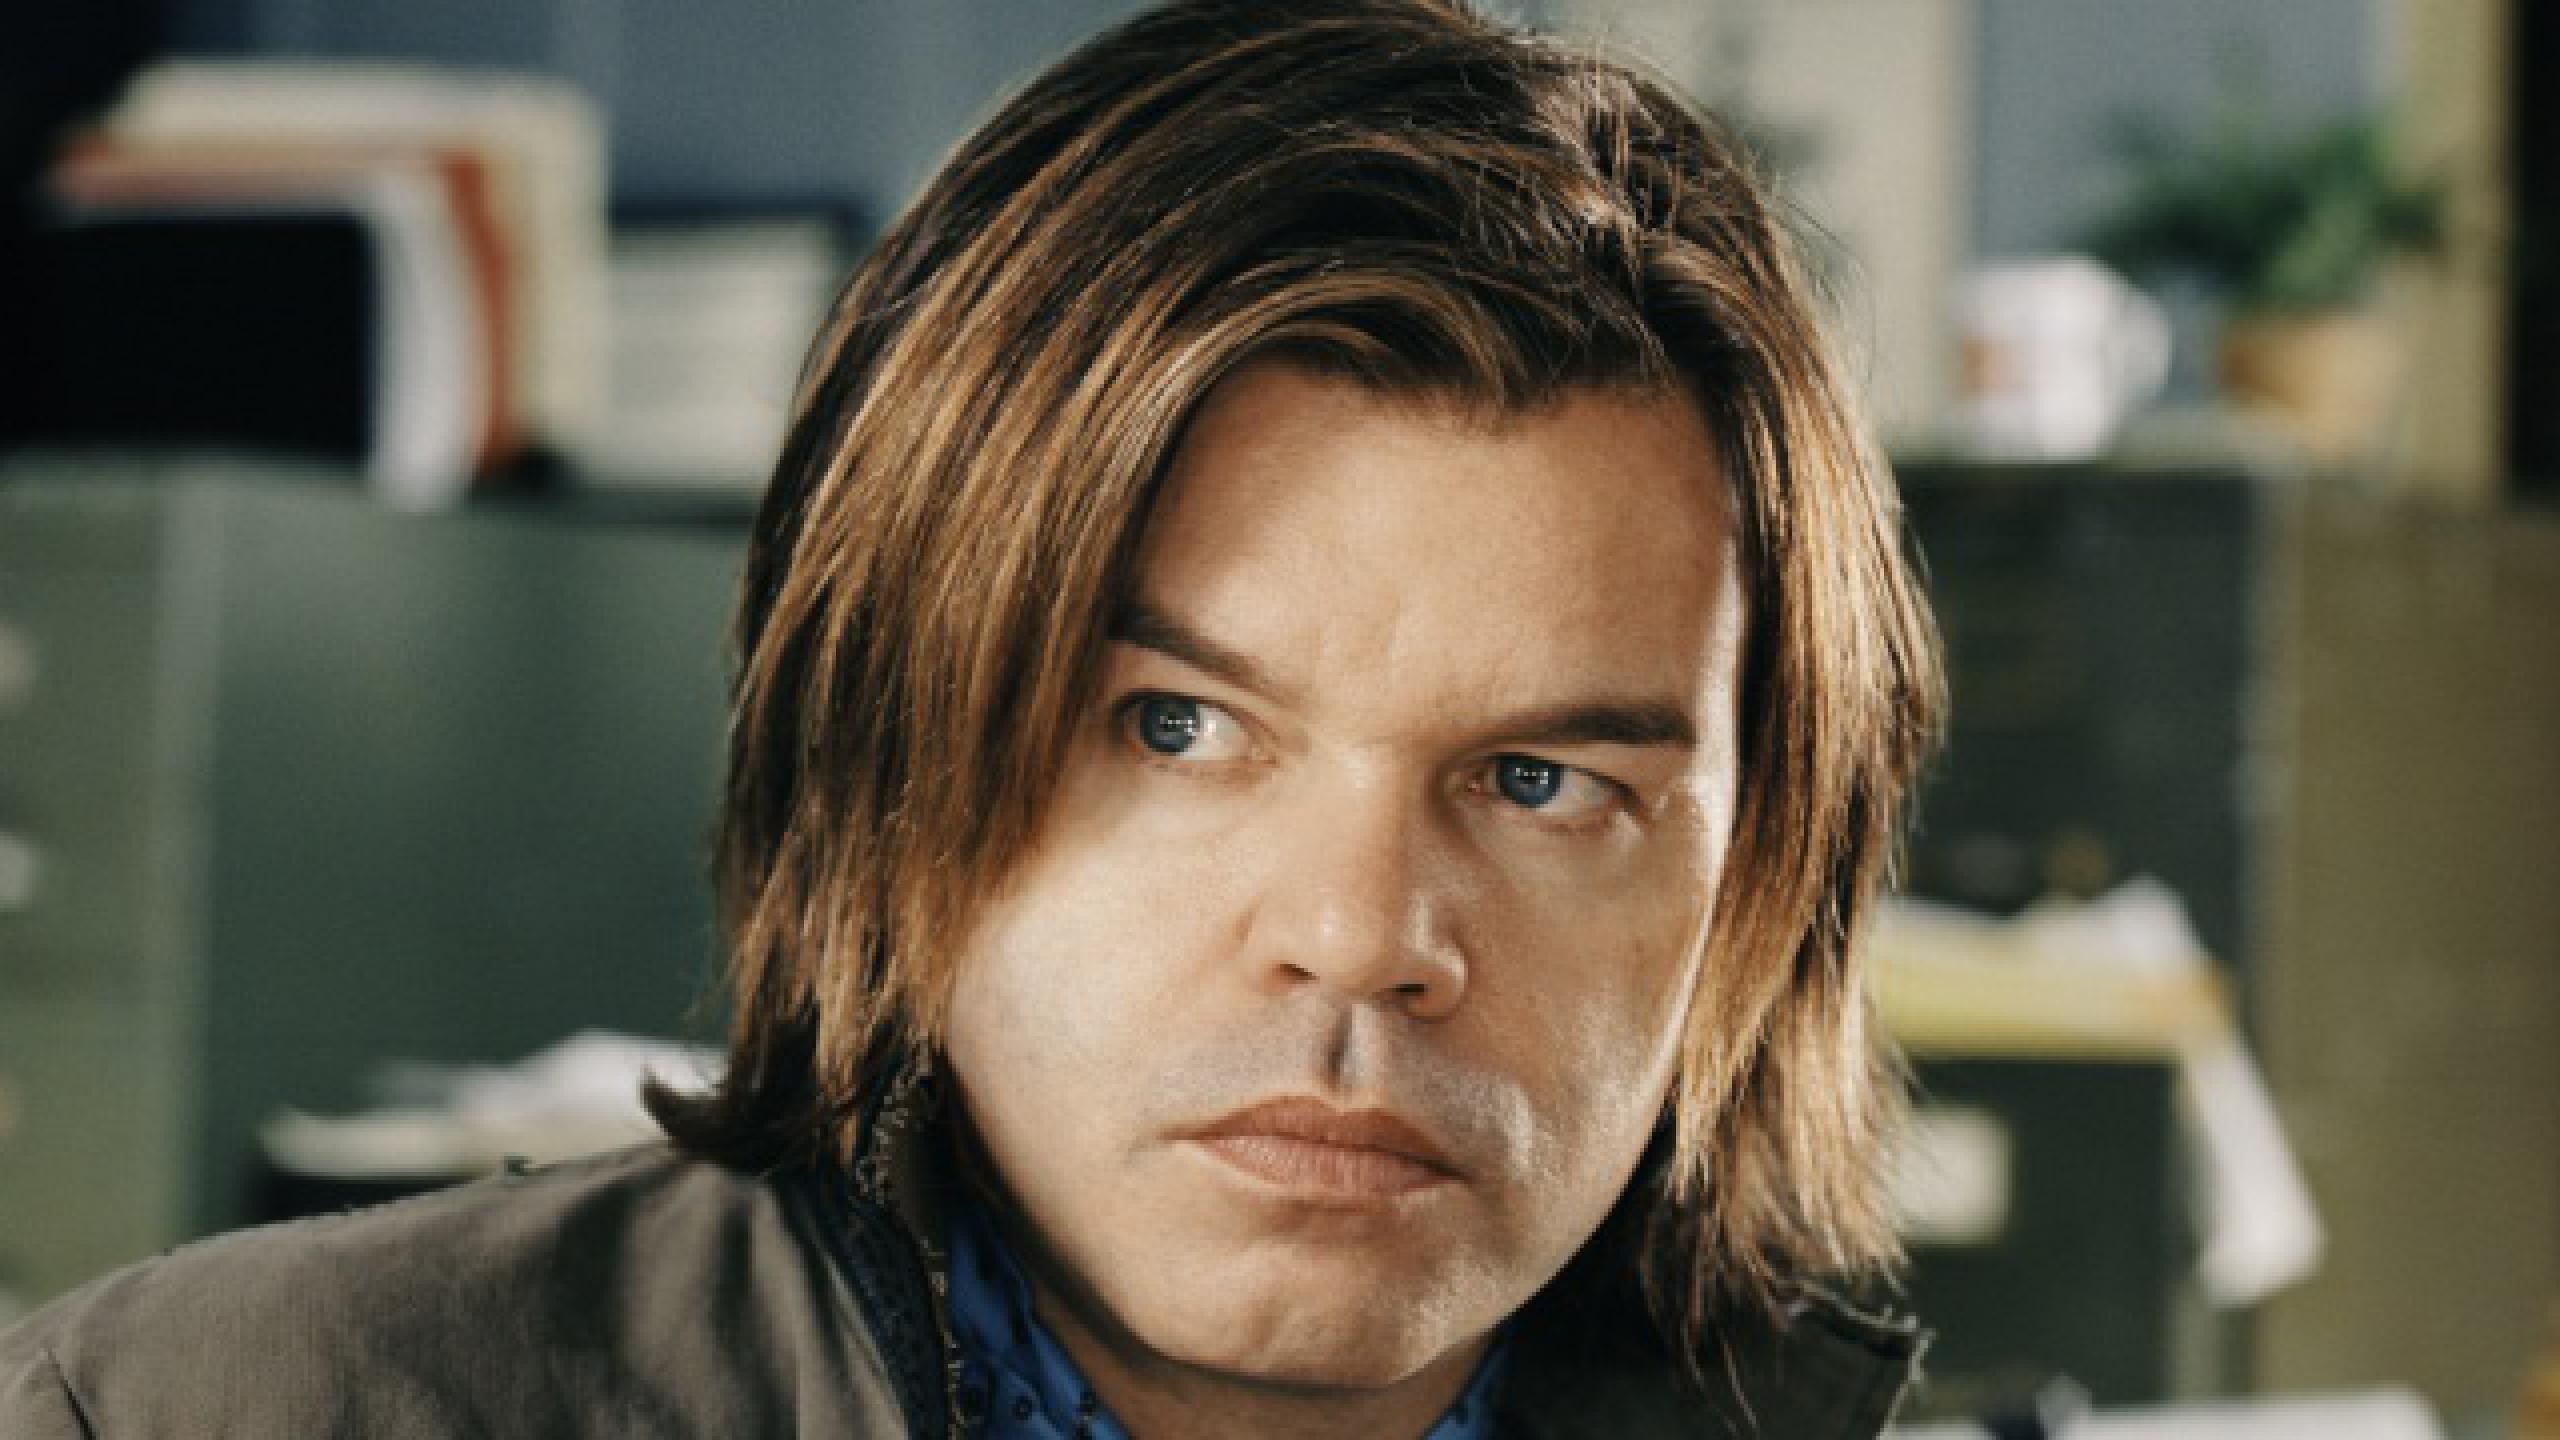 Paul Oakenfold Tour Dates 21 22 Paul Oakenfold Tickets And Concerts Wegow United States